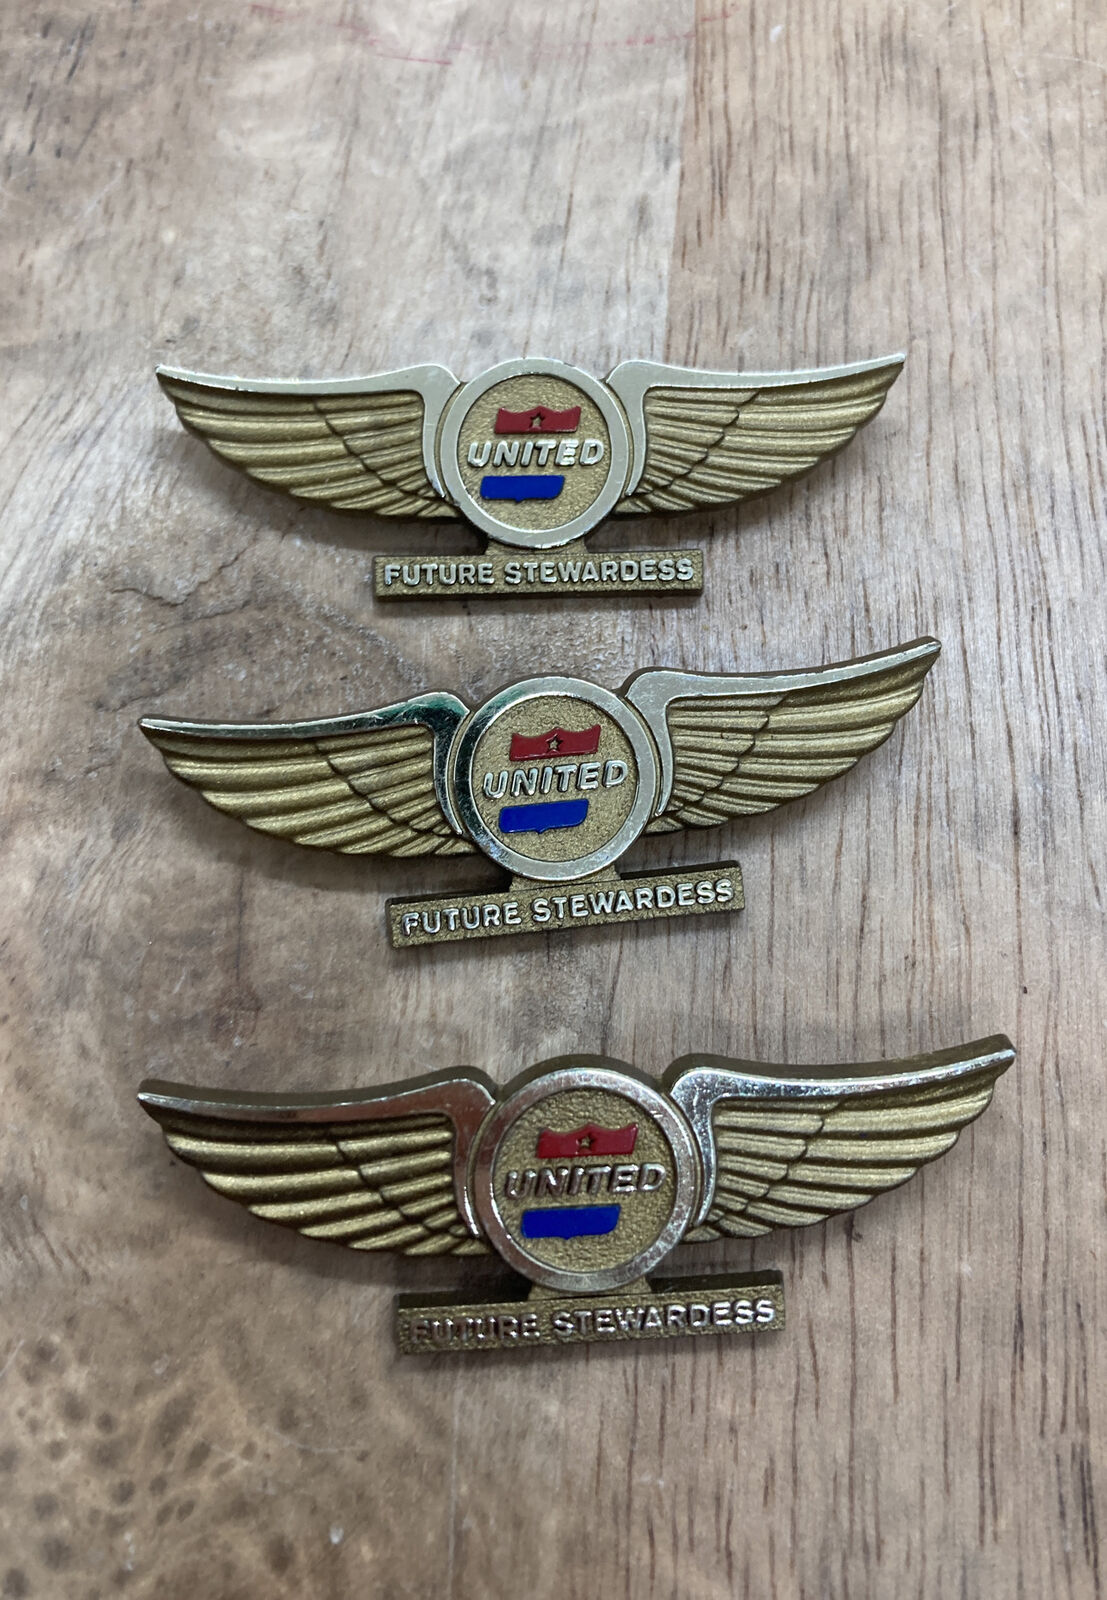 “Future Stewardess” AdvertisinWings Pin Gold Tone Plastic United Airlines / (3)